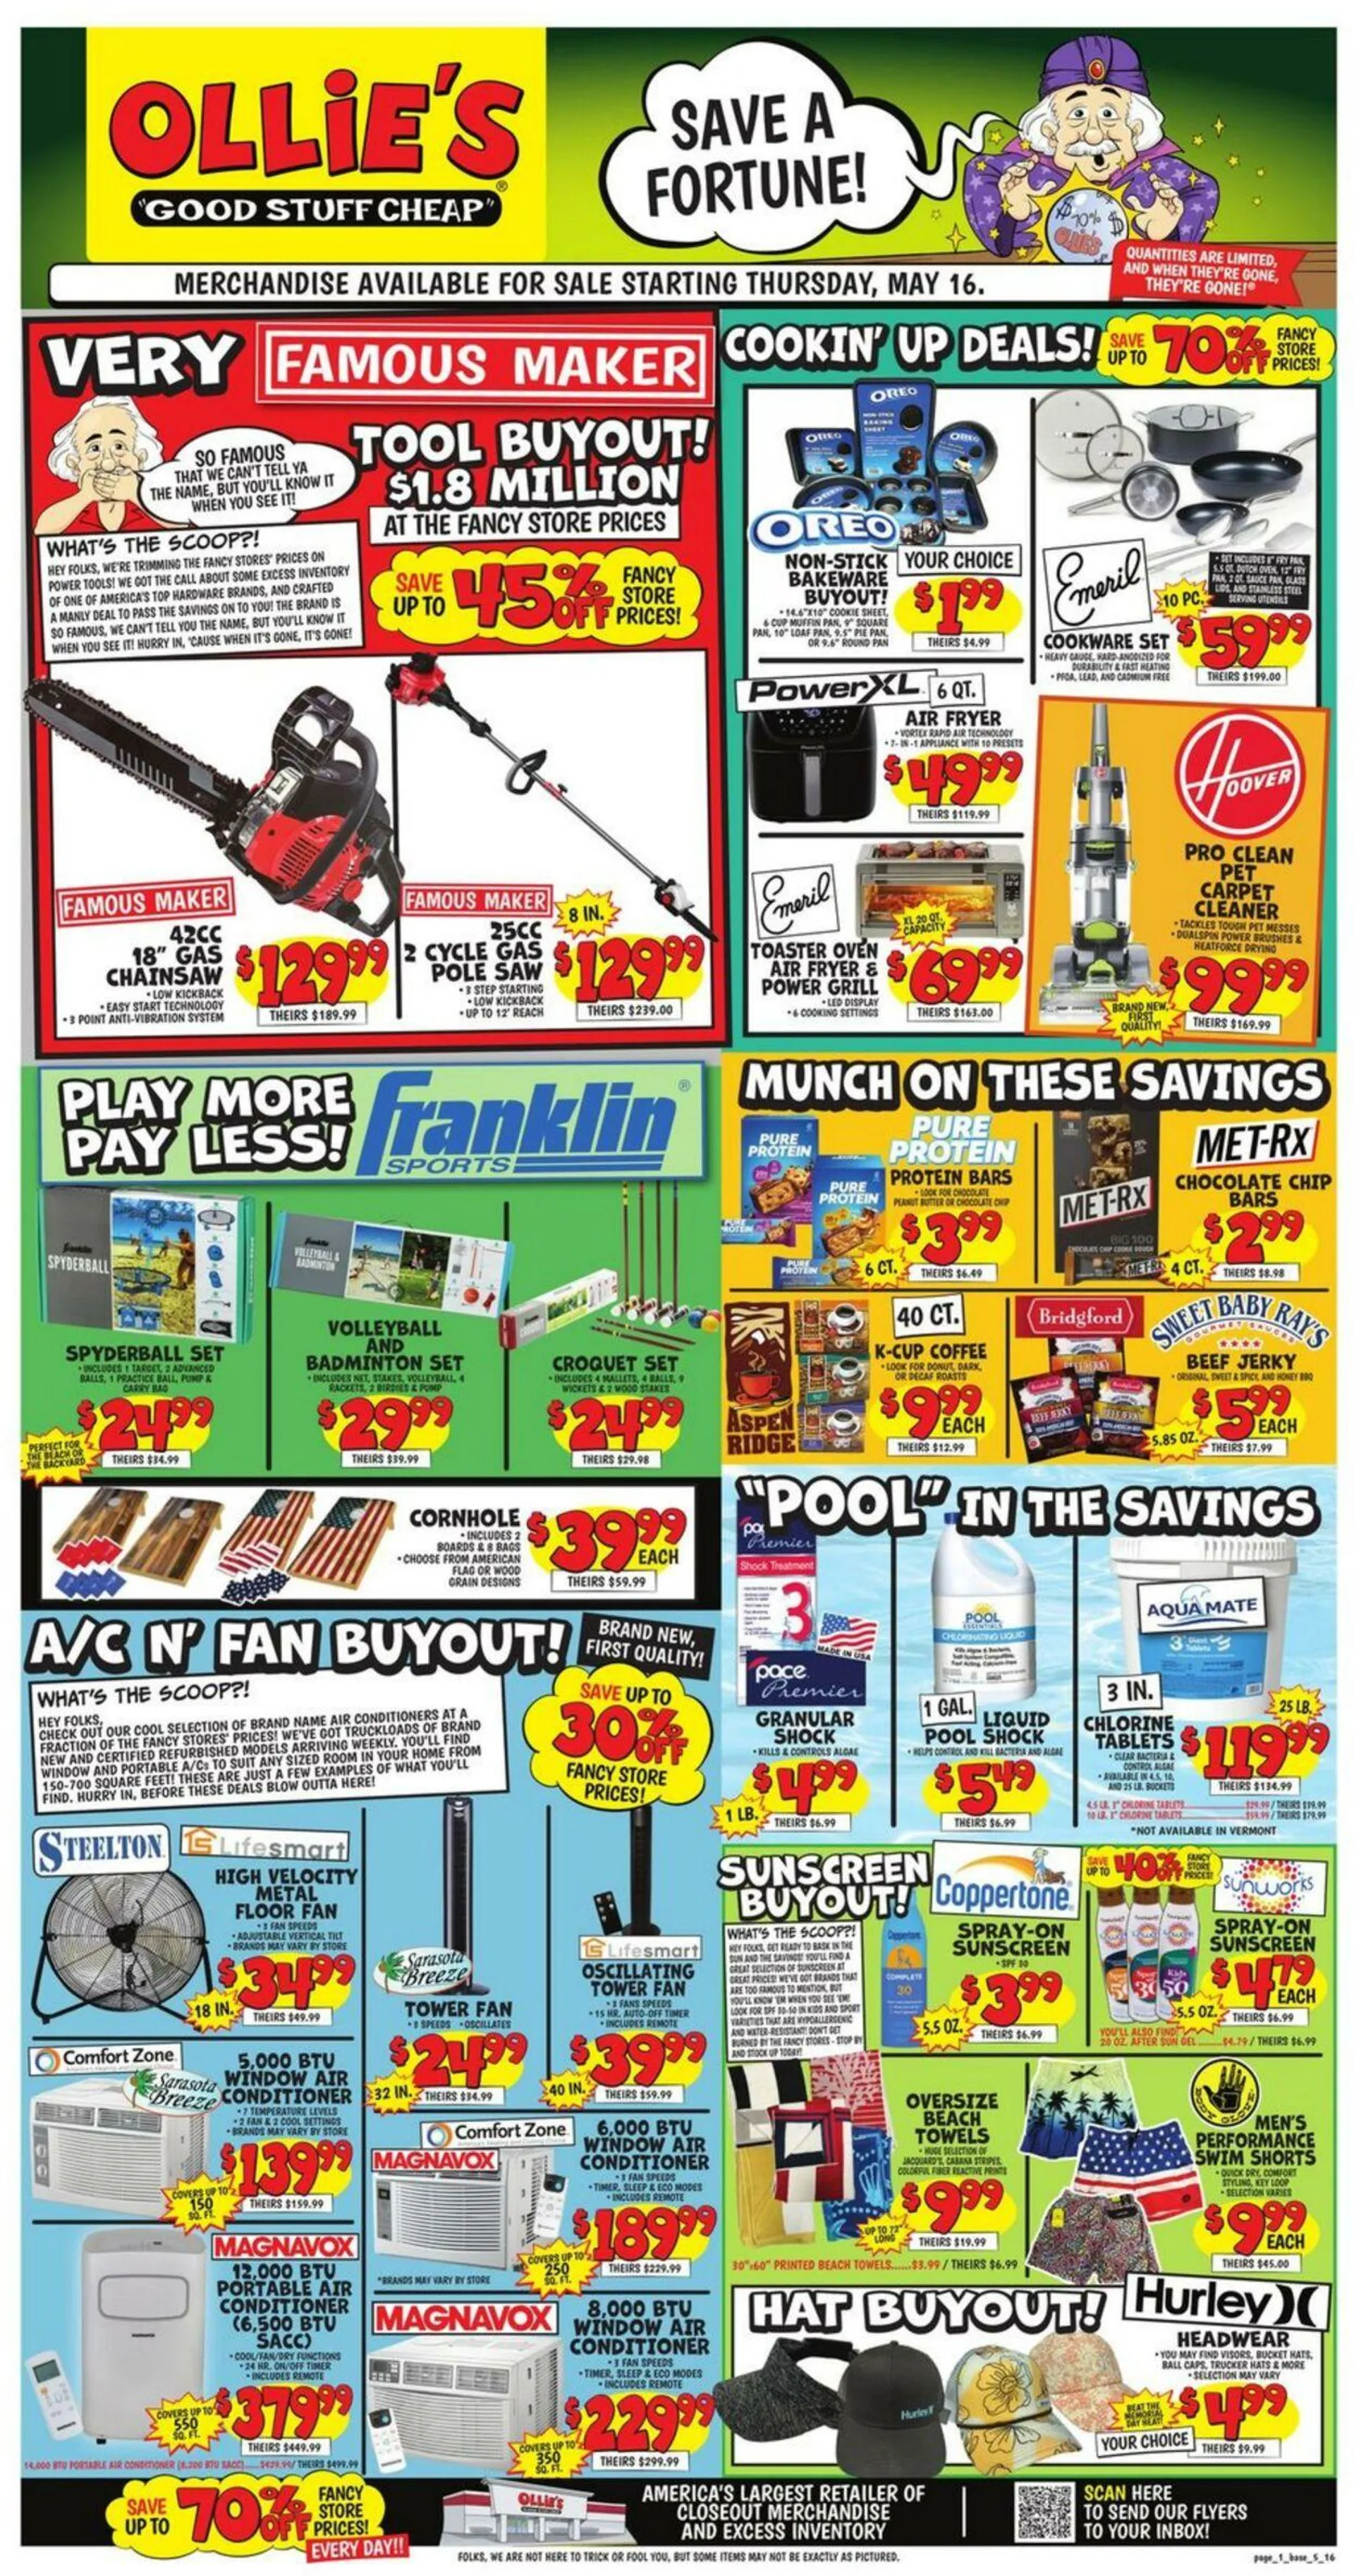 Ollies - New Jersey Current weekly ad - 1